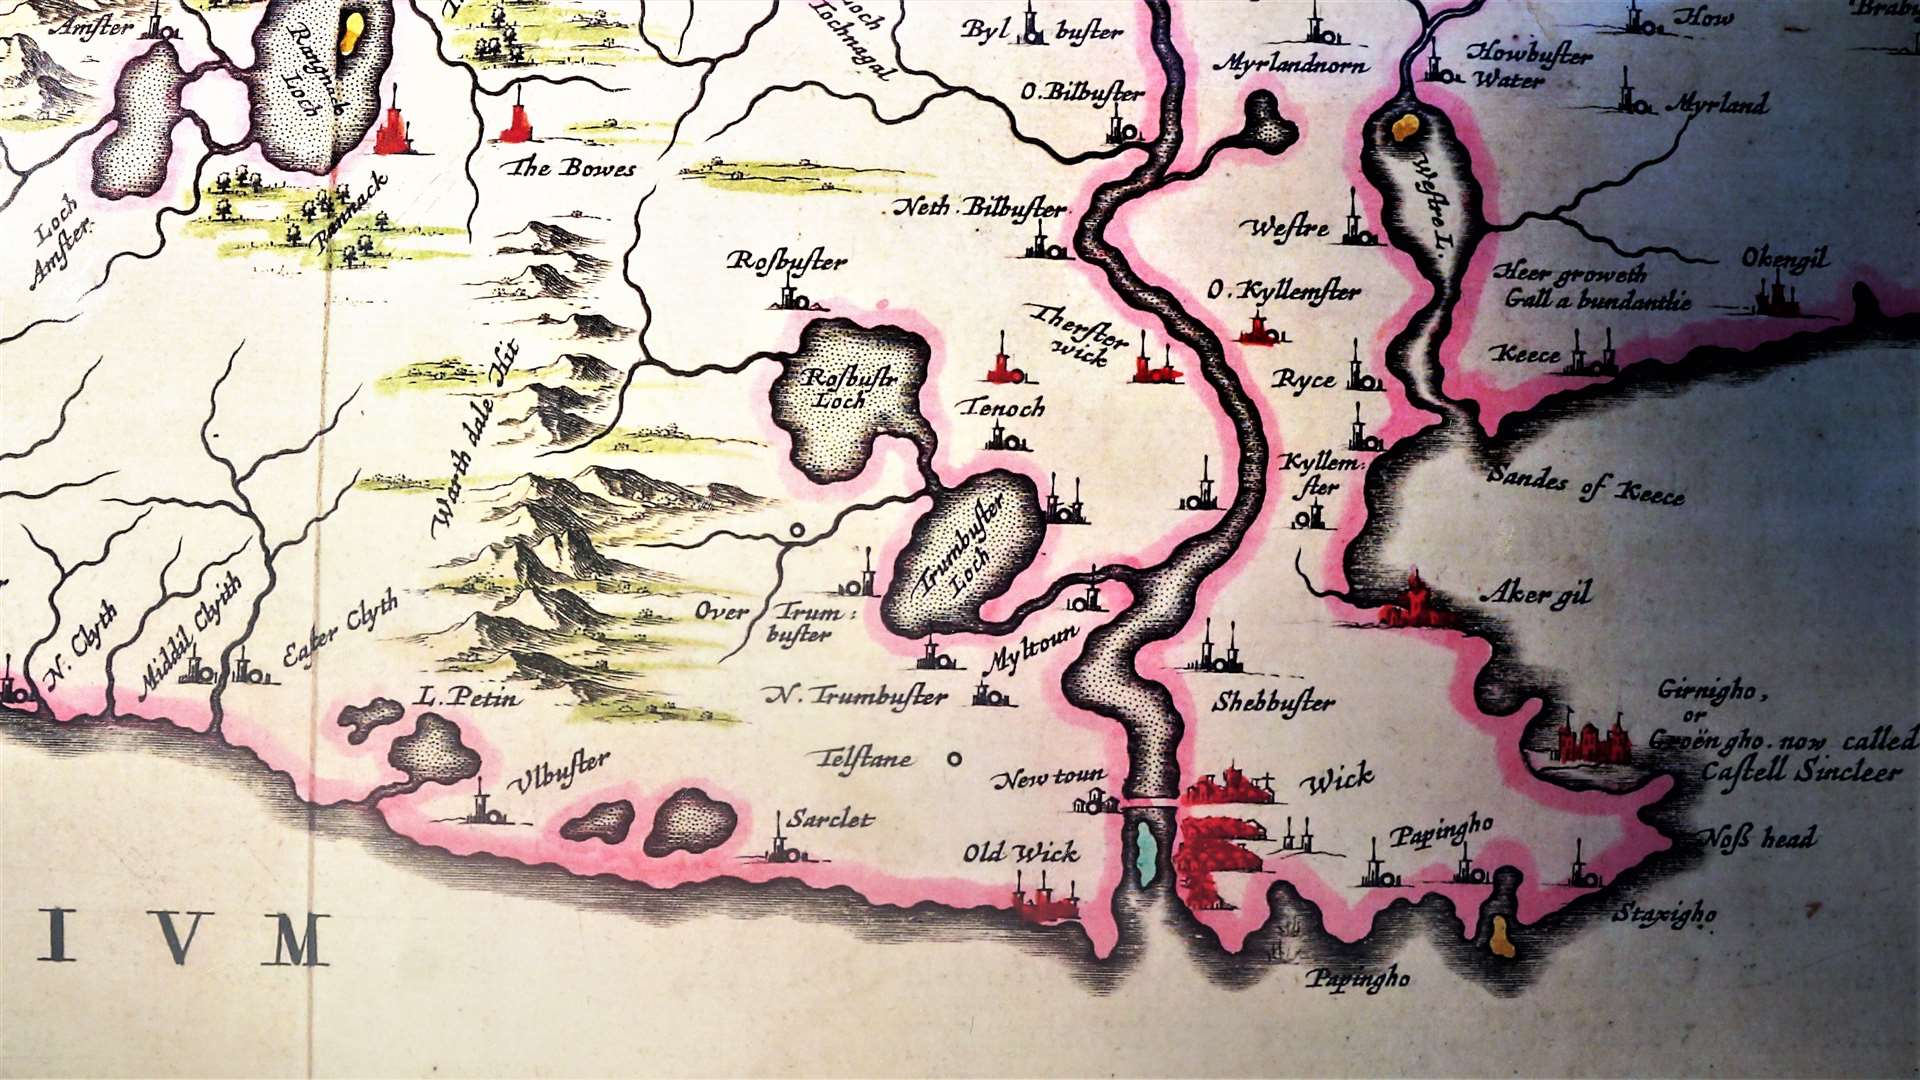 Timothy Pont map of Caithness showing what appears to be a castle at Sarclet. A dig is planned to discover what may have existed there. Picture: DGS